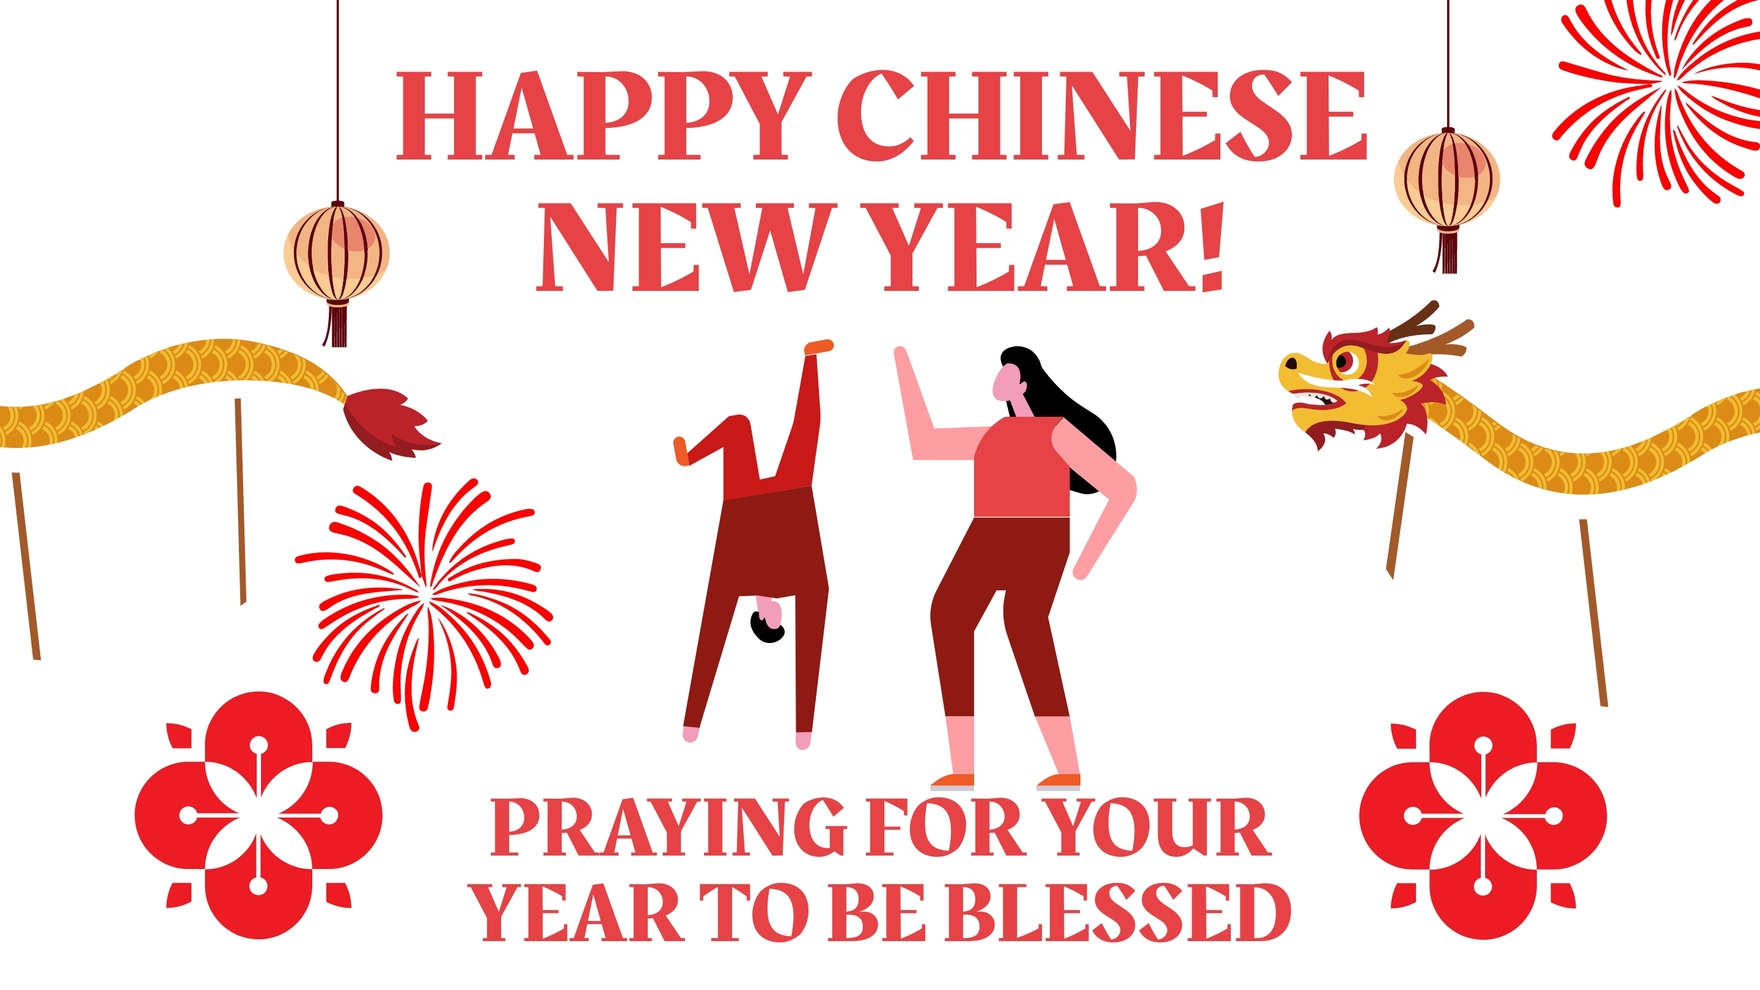 Free Chinese New Year Greeting Card Background in PDF, Illustrator, PSD, EPS, SVG, JPG, PNG